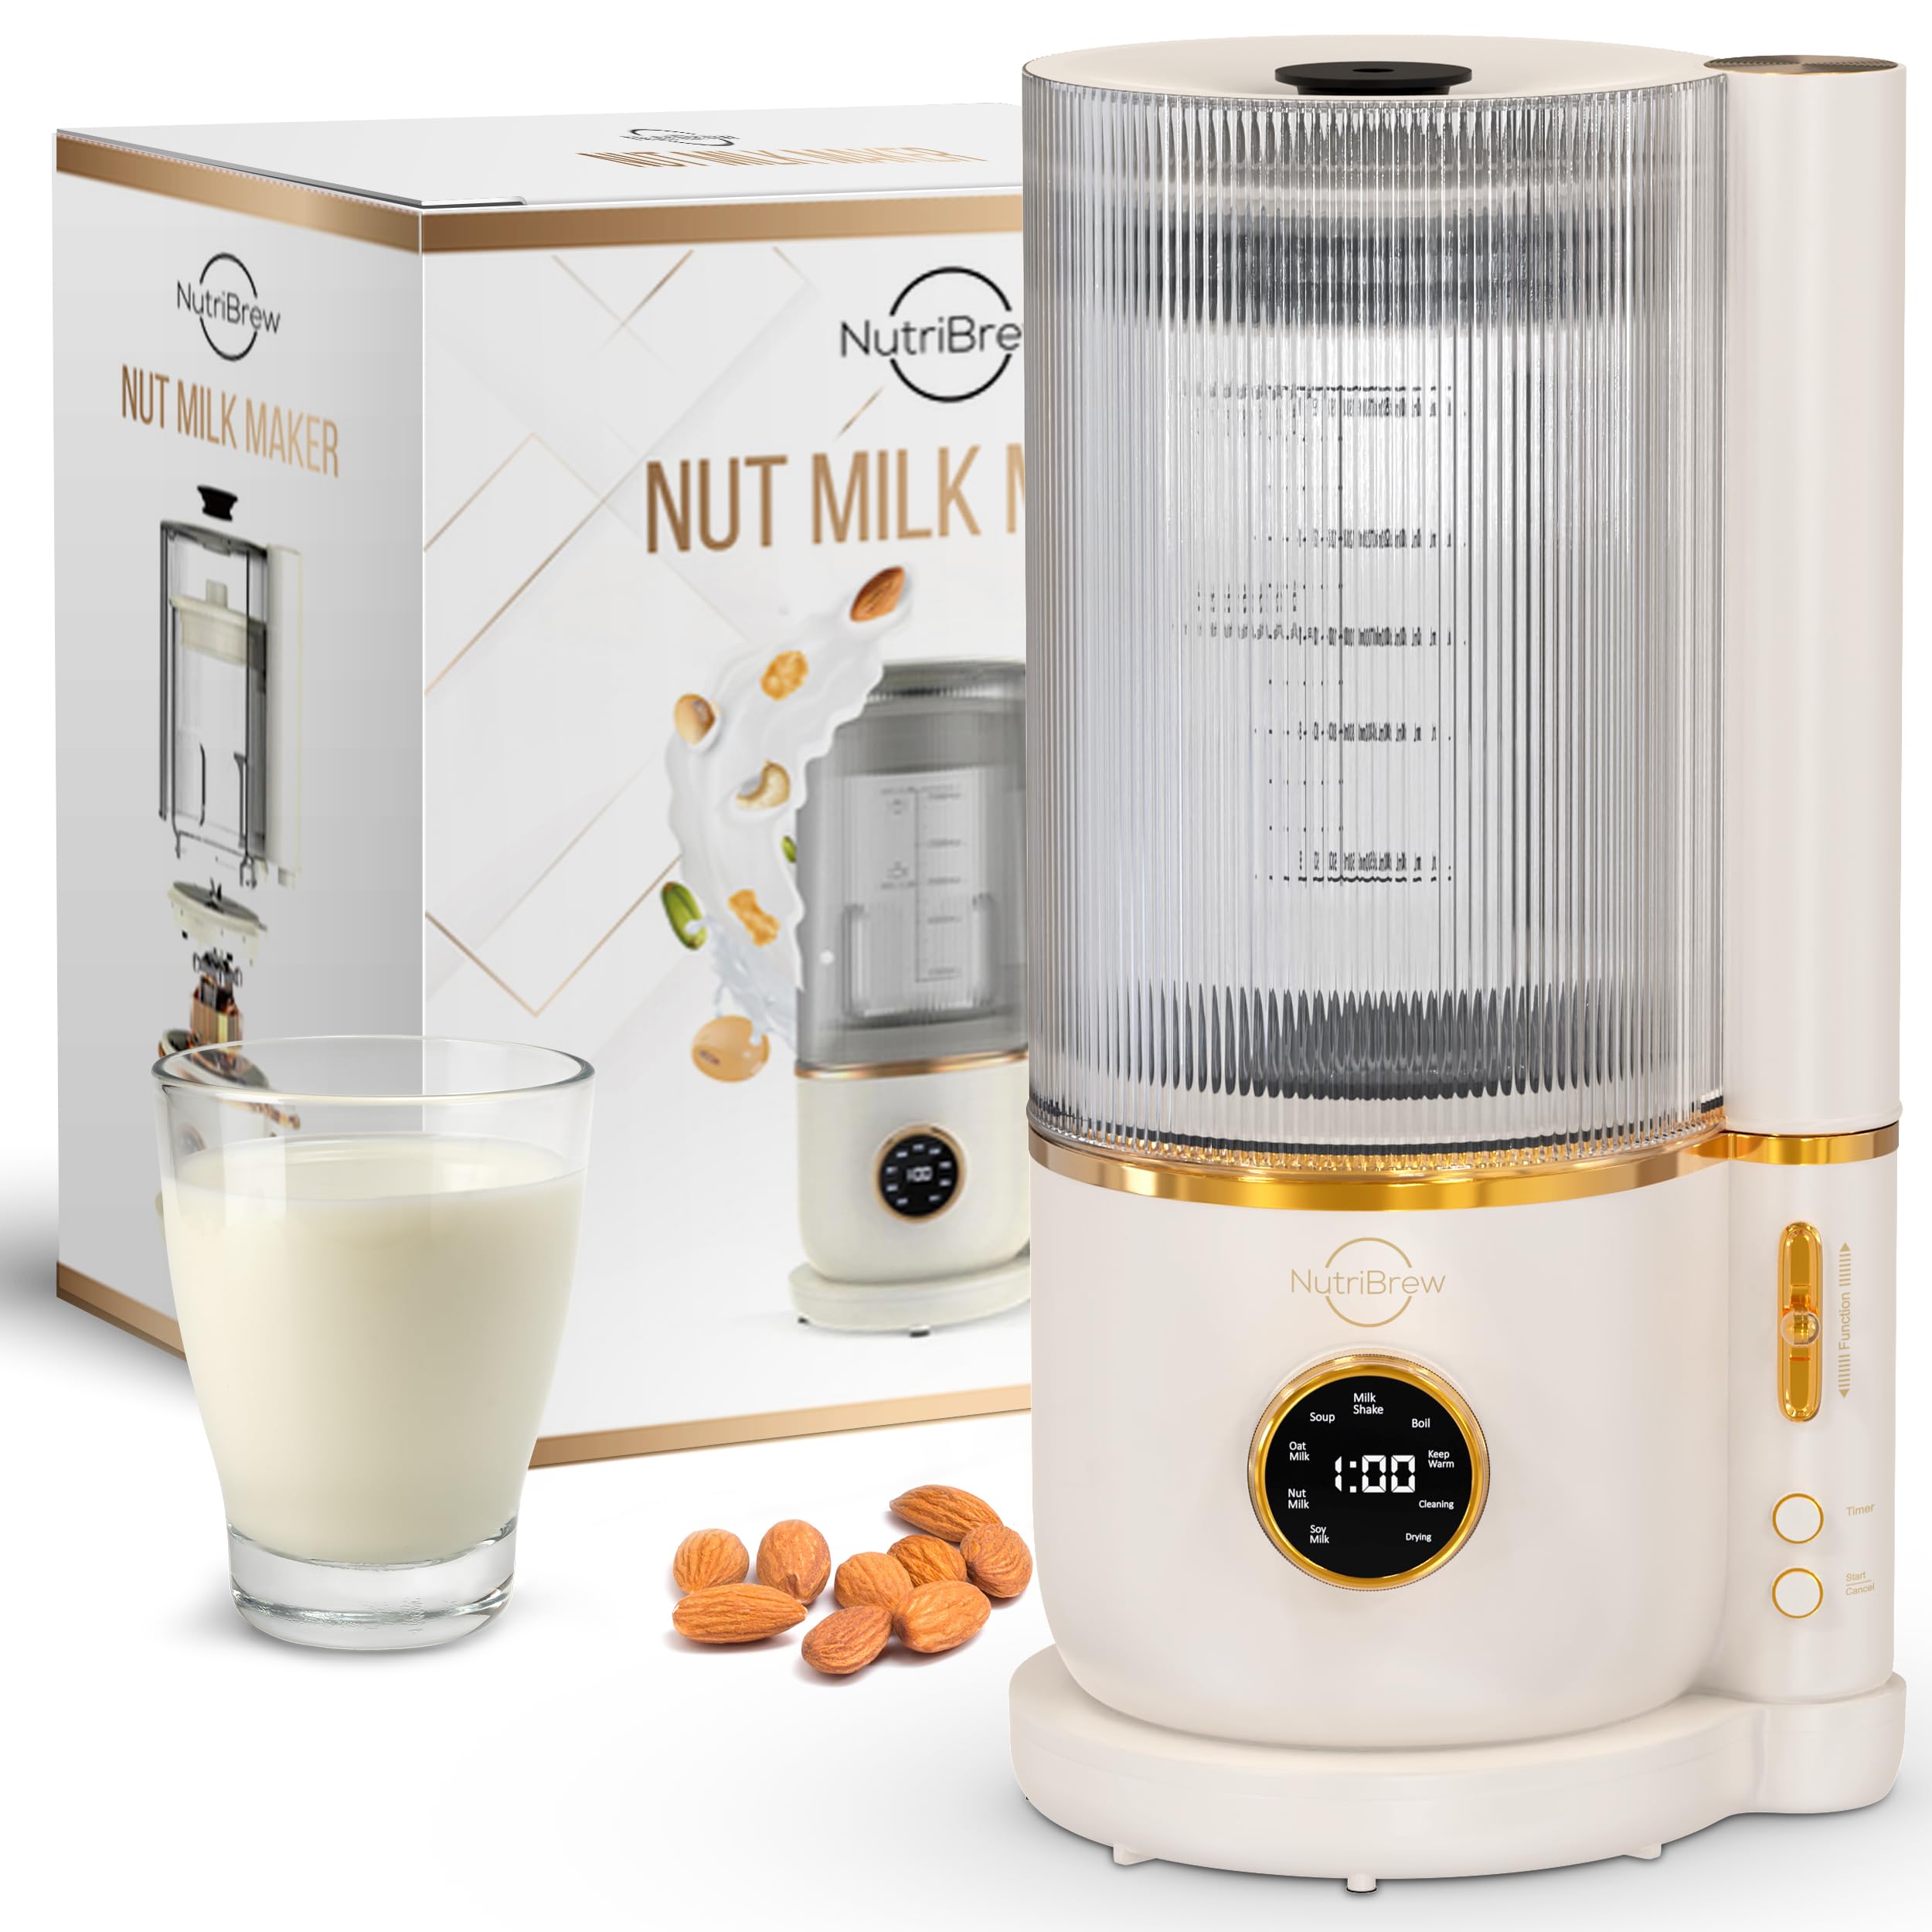 A nut milk maker with a glass of milk next to it.